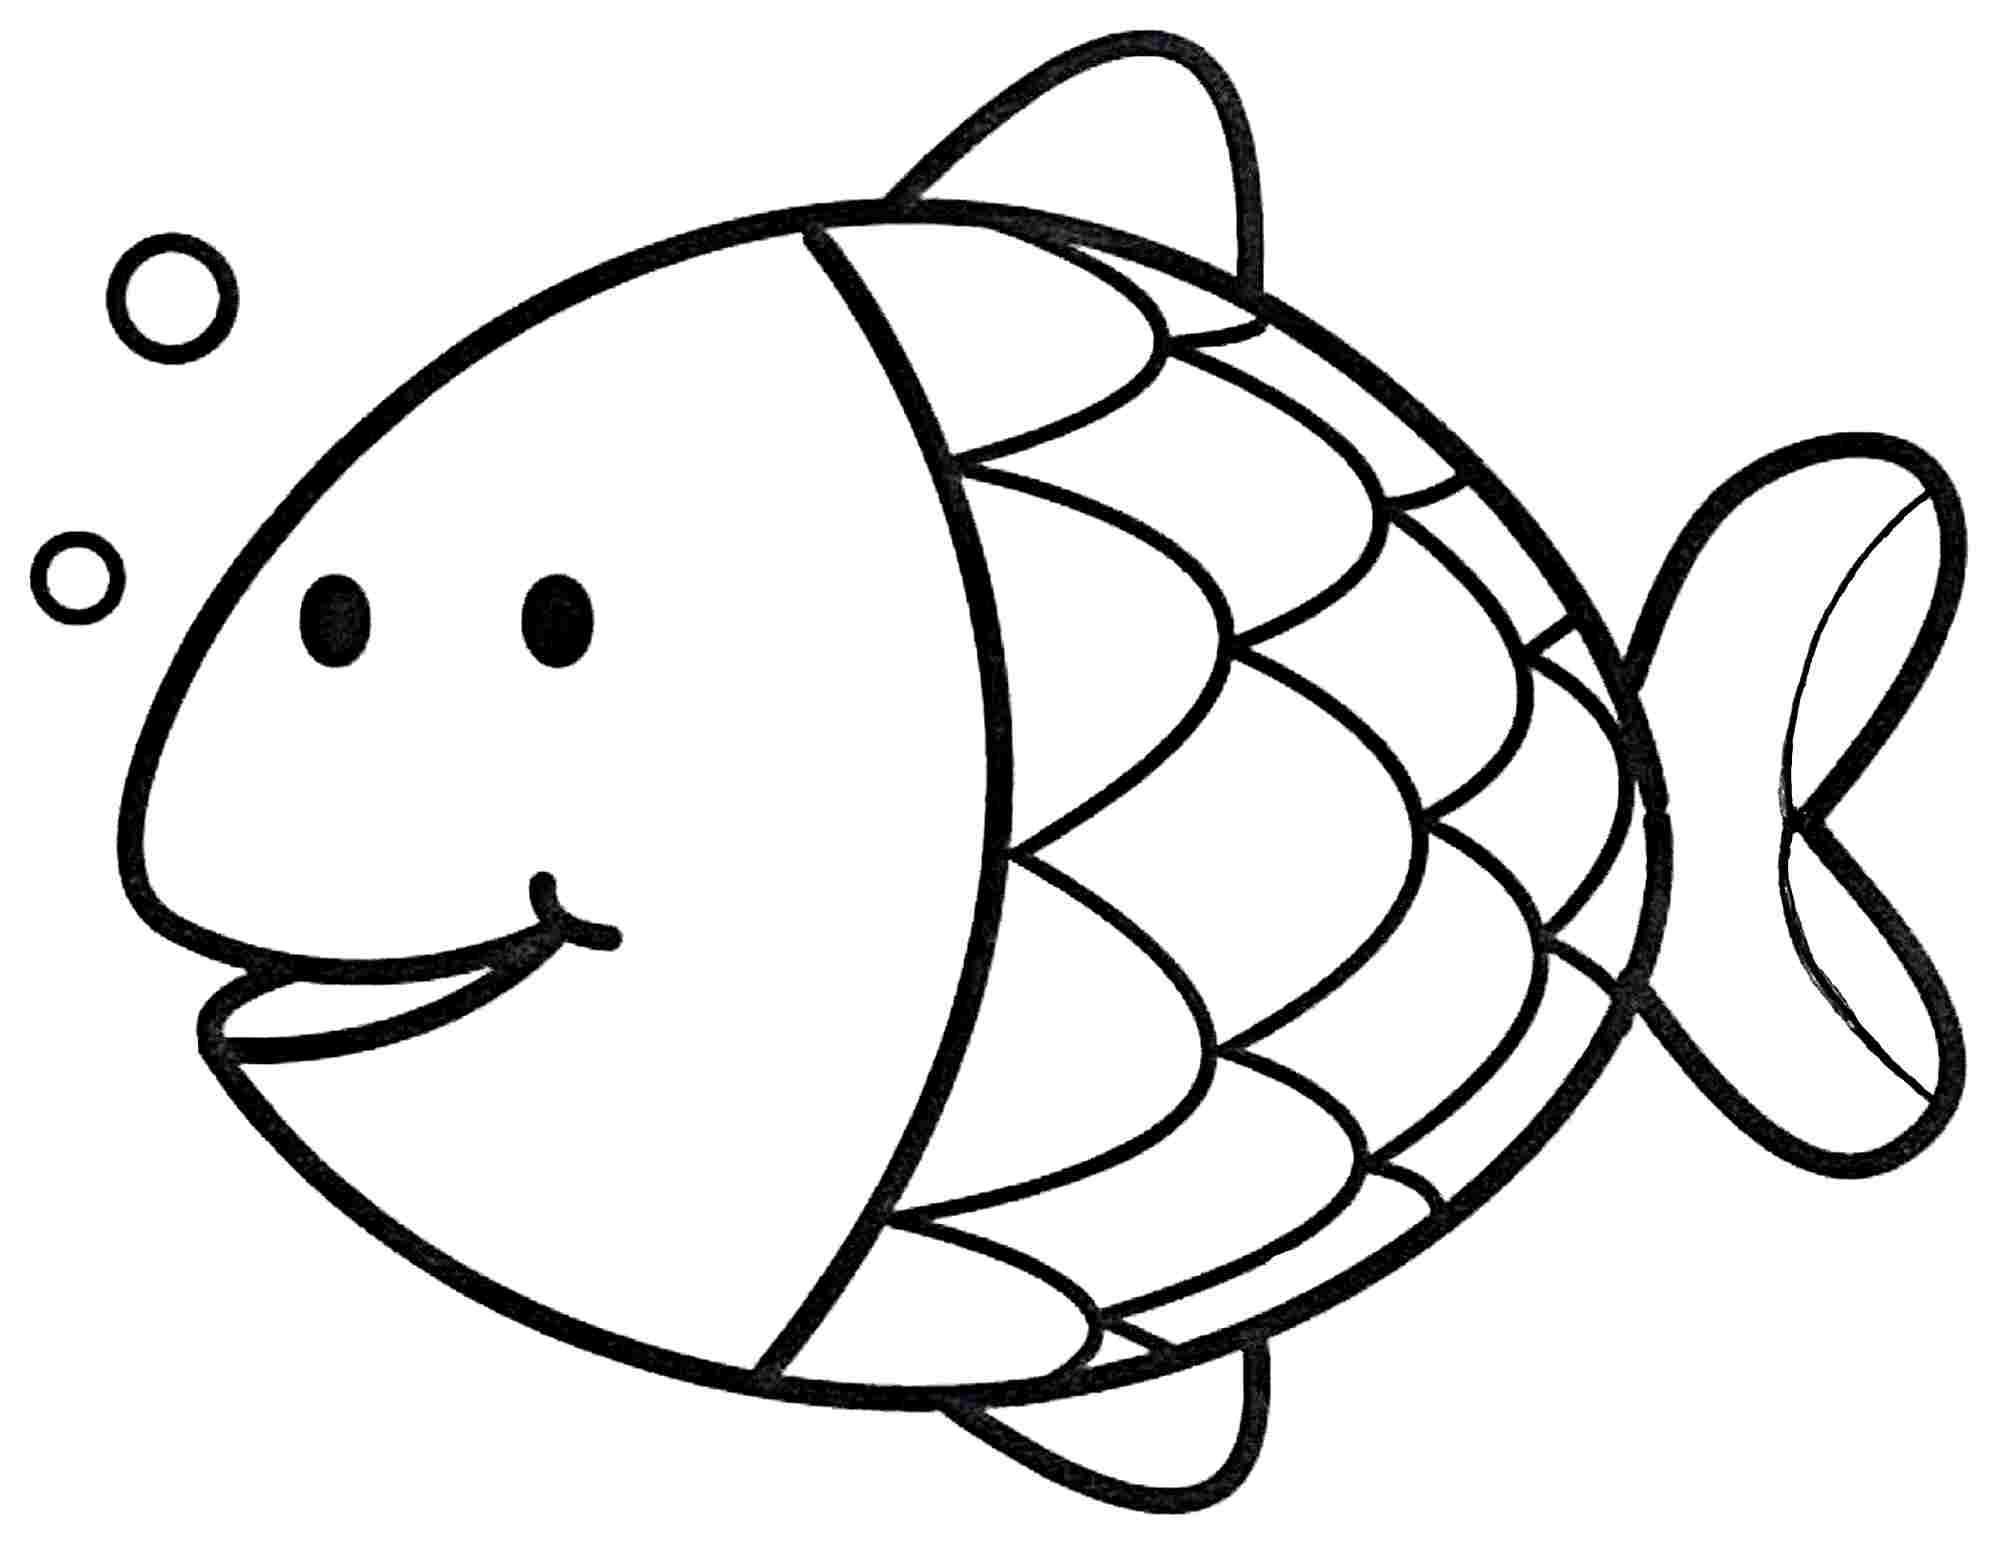 Coloring Book Fish Coloring Pages 91 With Fish Coloring Pages from Fish Coloring Pages